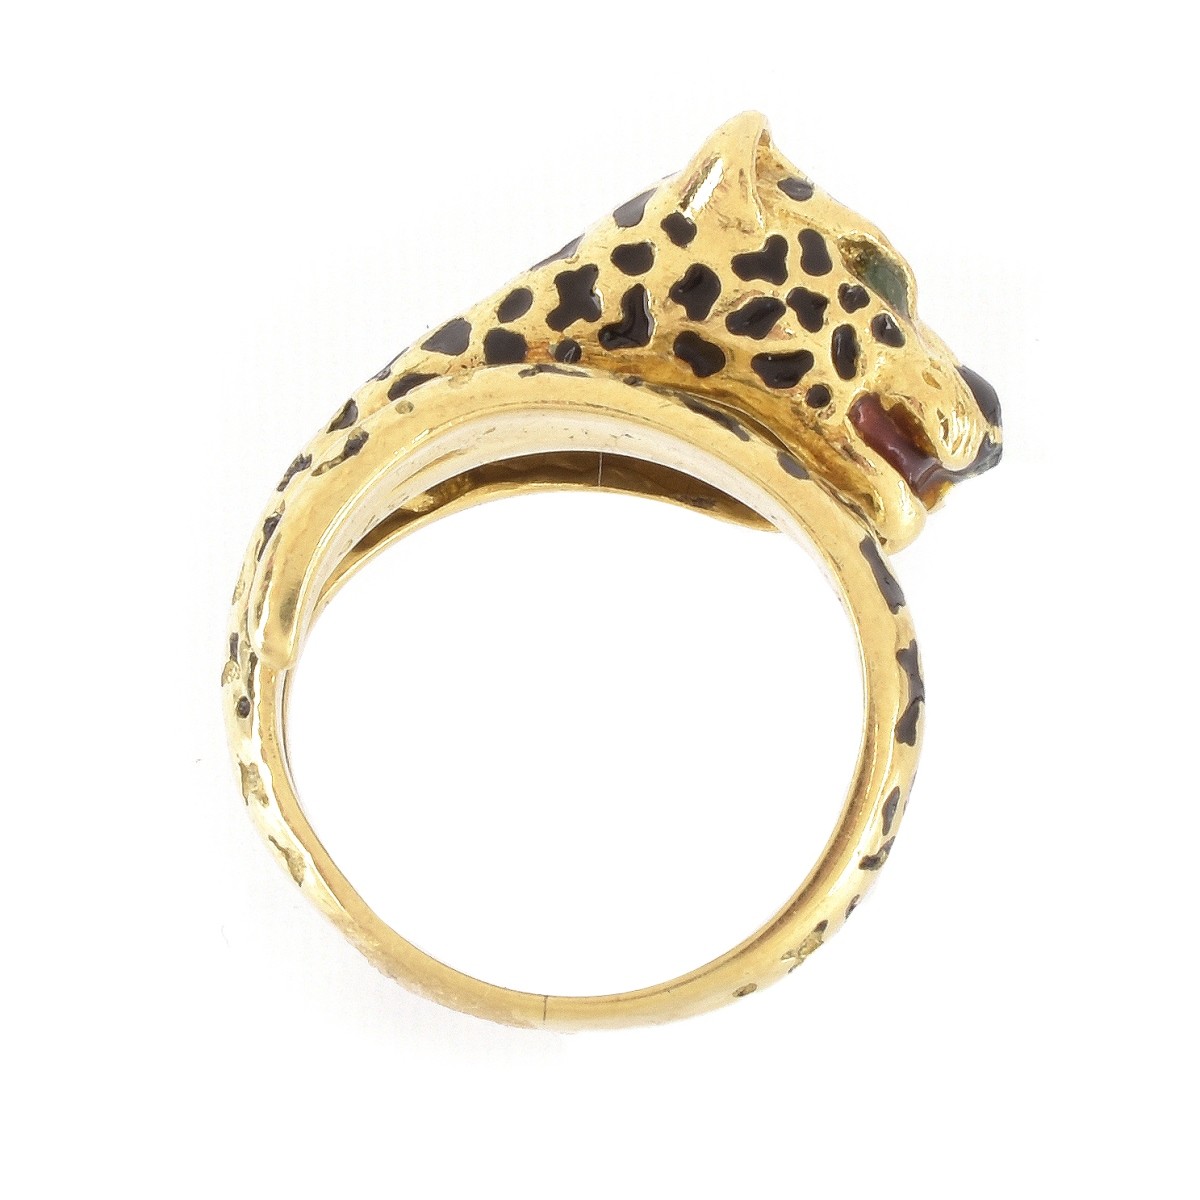 Cartier style 18K Ring